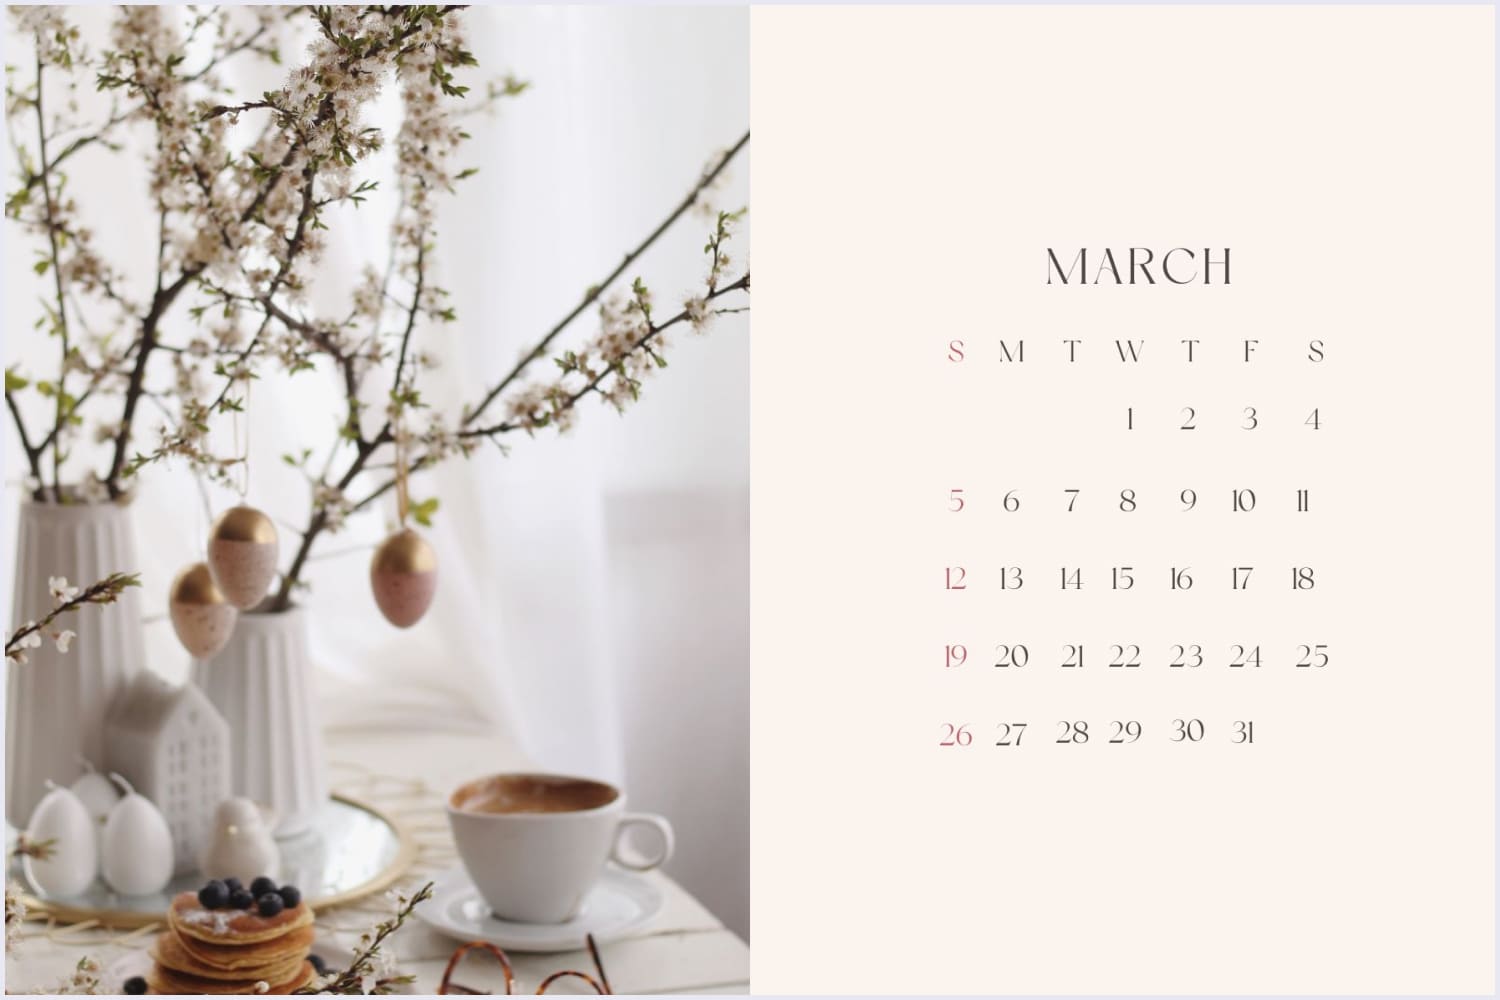 Calendar for March with a photo of a decorated table.